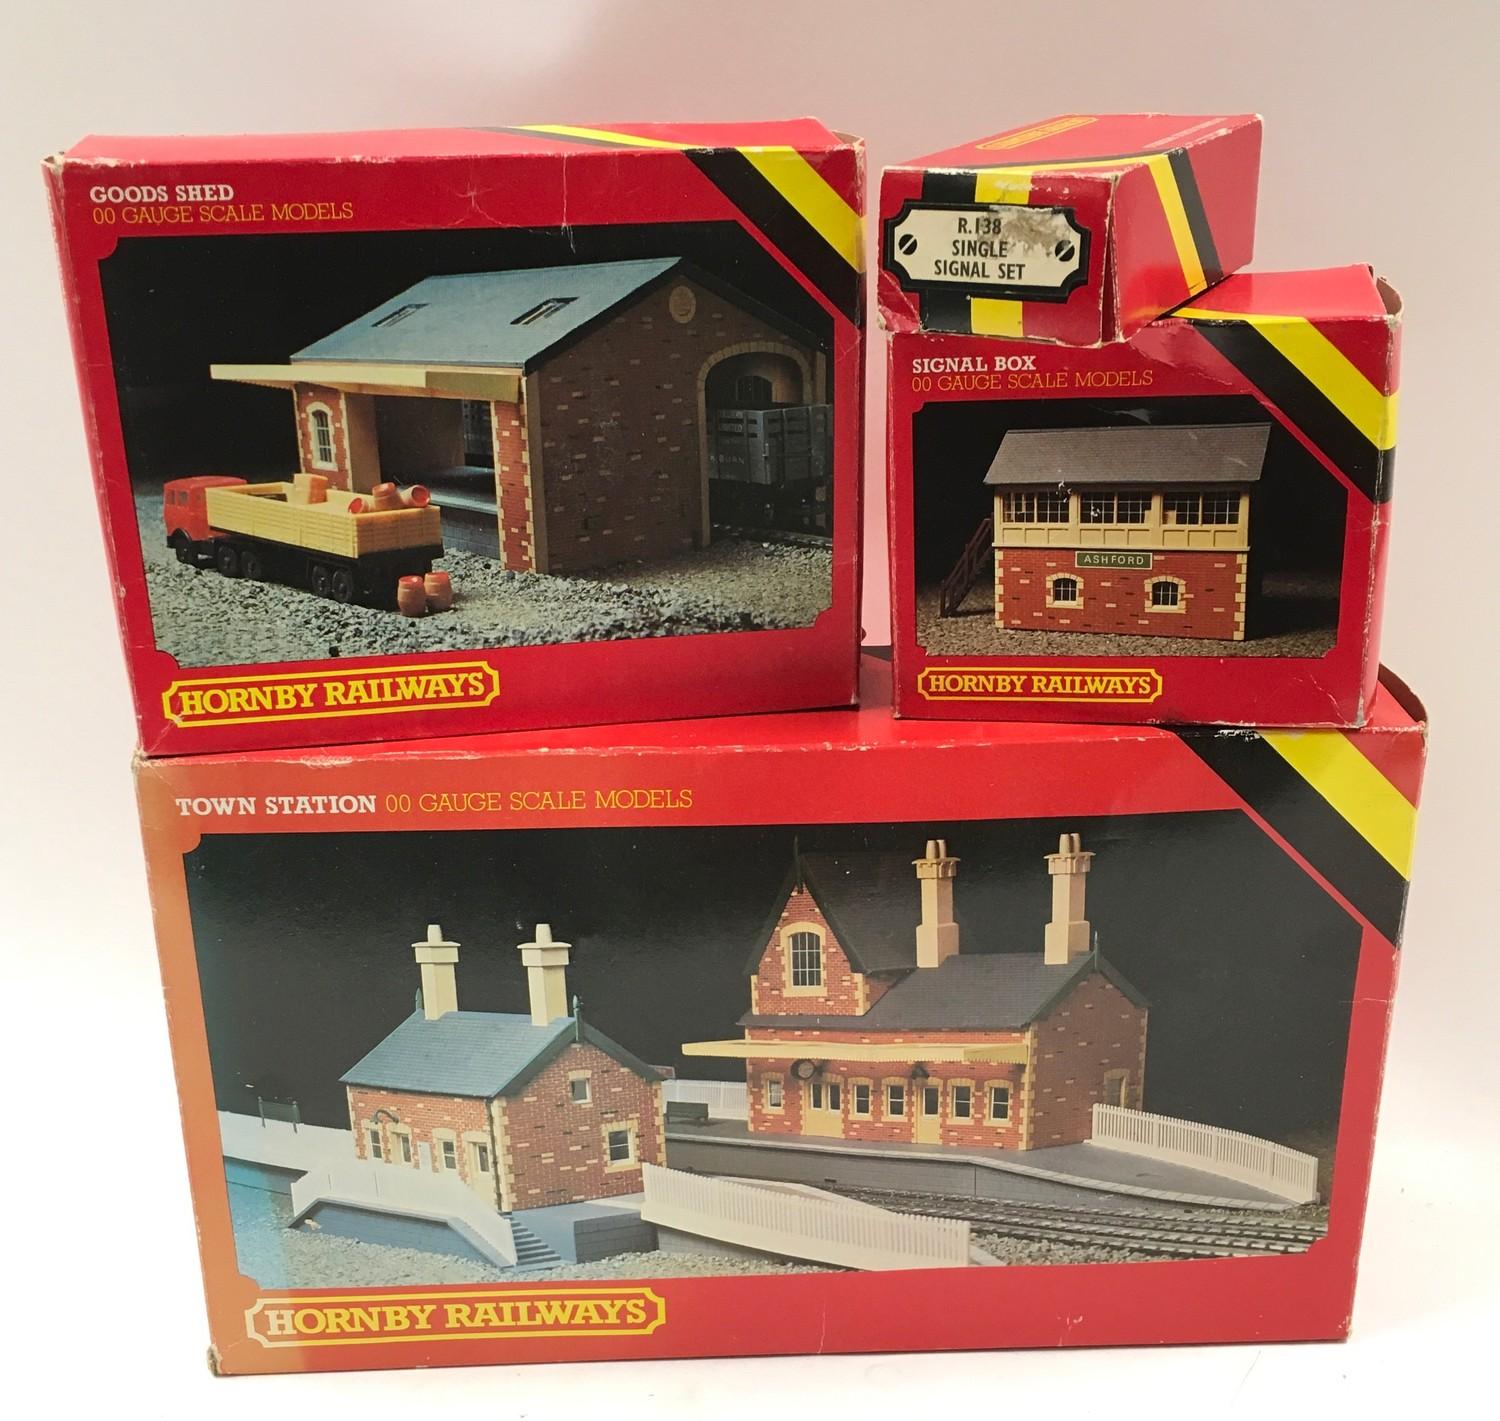 Hornby R593 Town station, R506 Goods Shed, R503 Signal Box and R138 Single Signal set. All boxed.